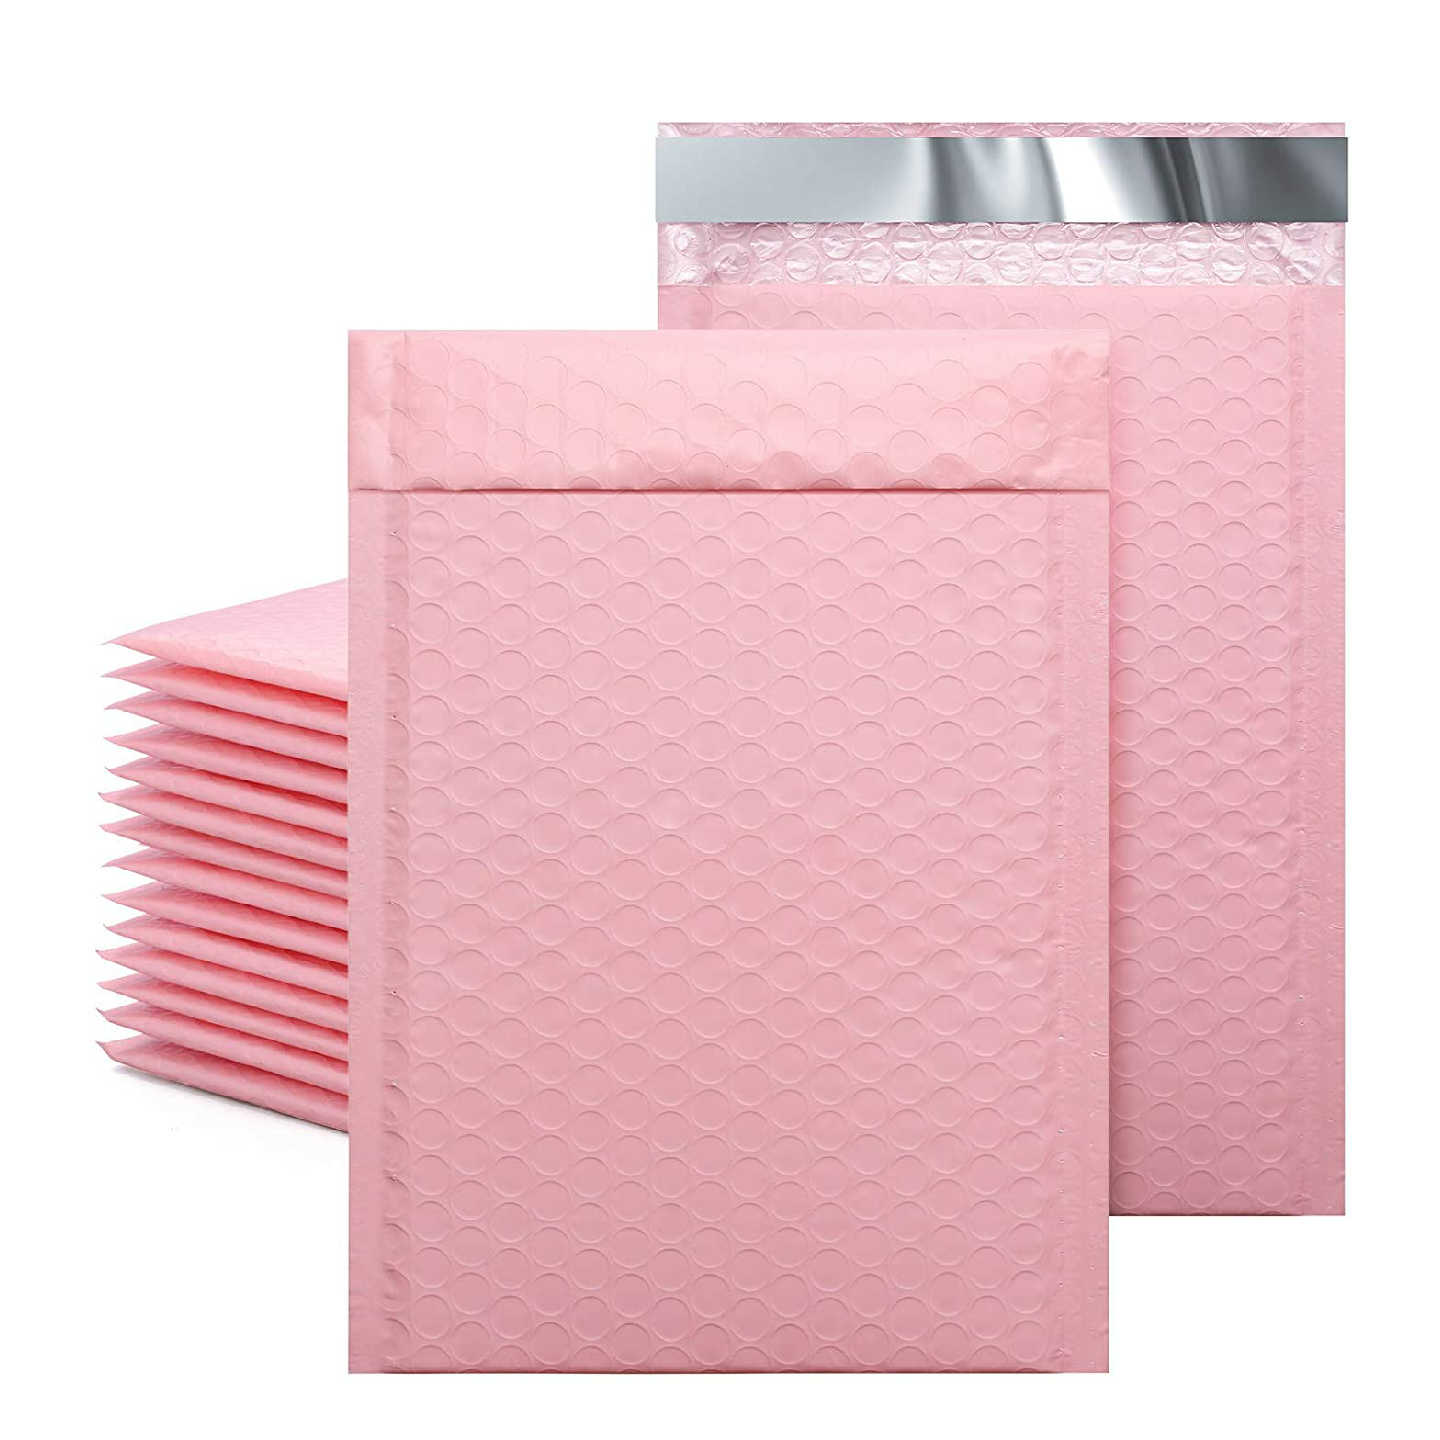 6×10 Bubble Mailers (Light Pink)